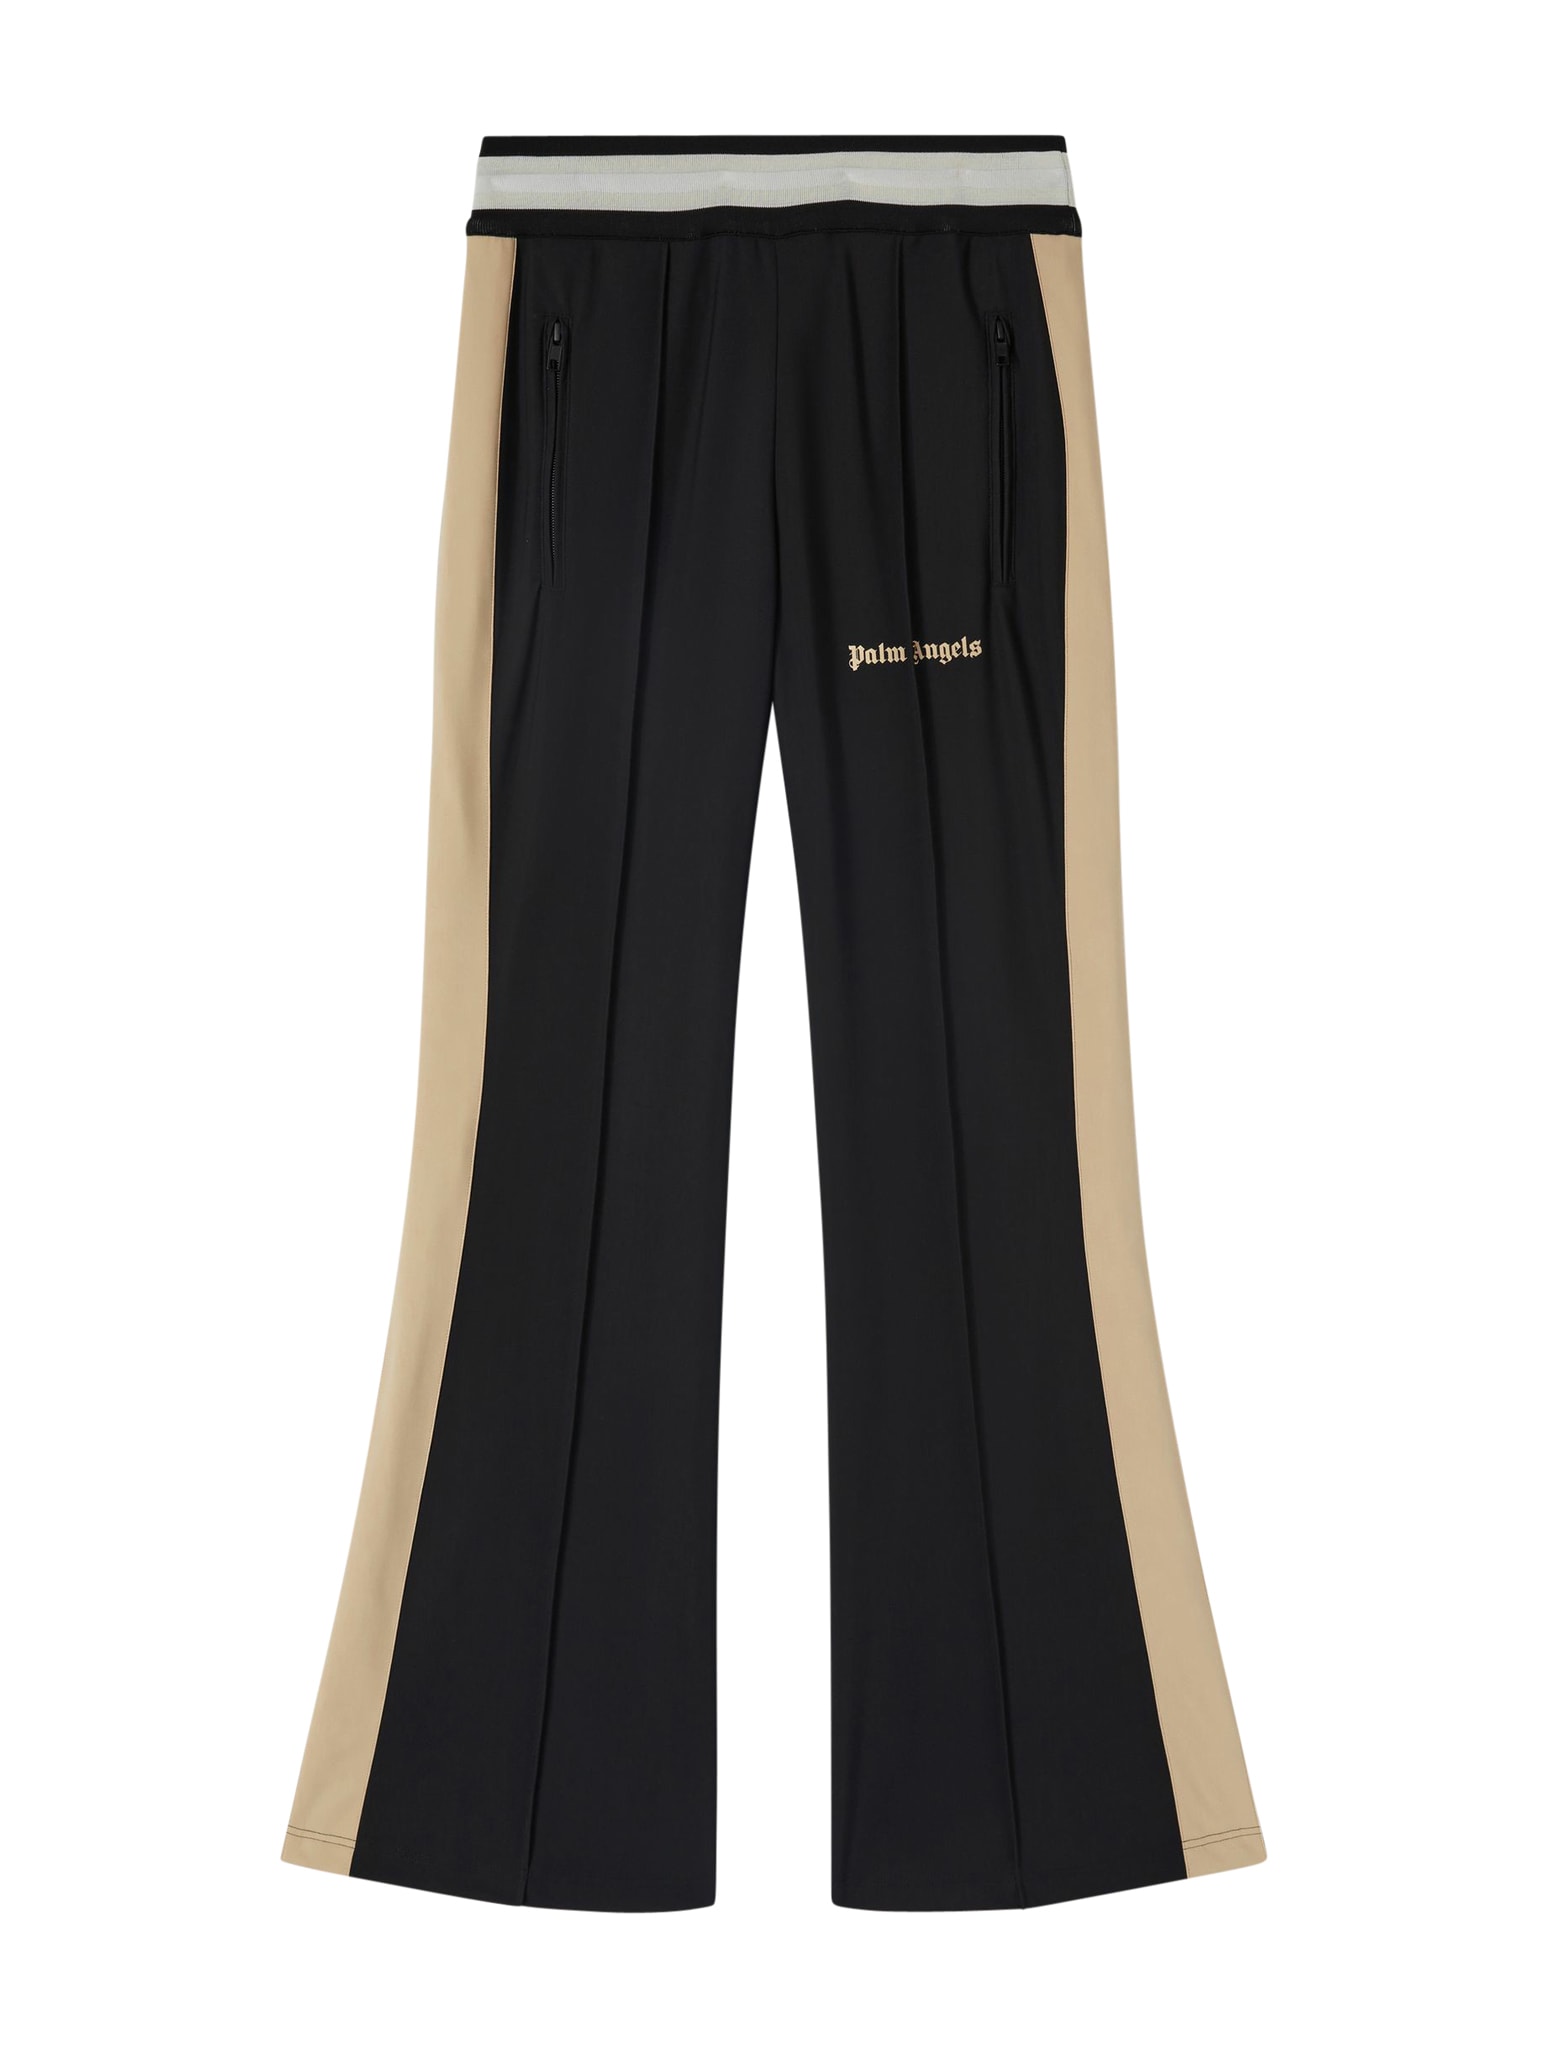 PALM ANGELS ULTRALIGHT FLARE TRACK PANTS BLACK NUDE